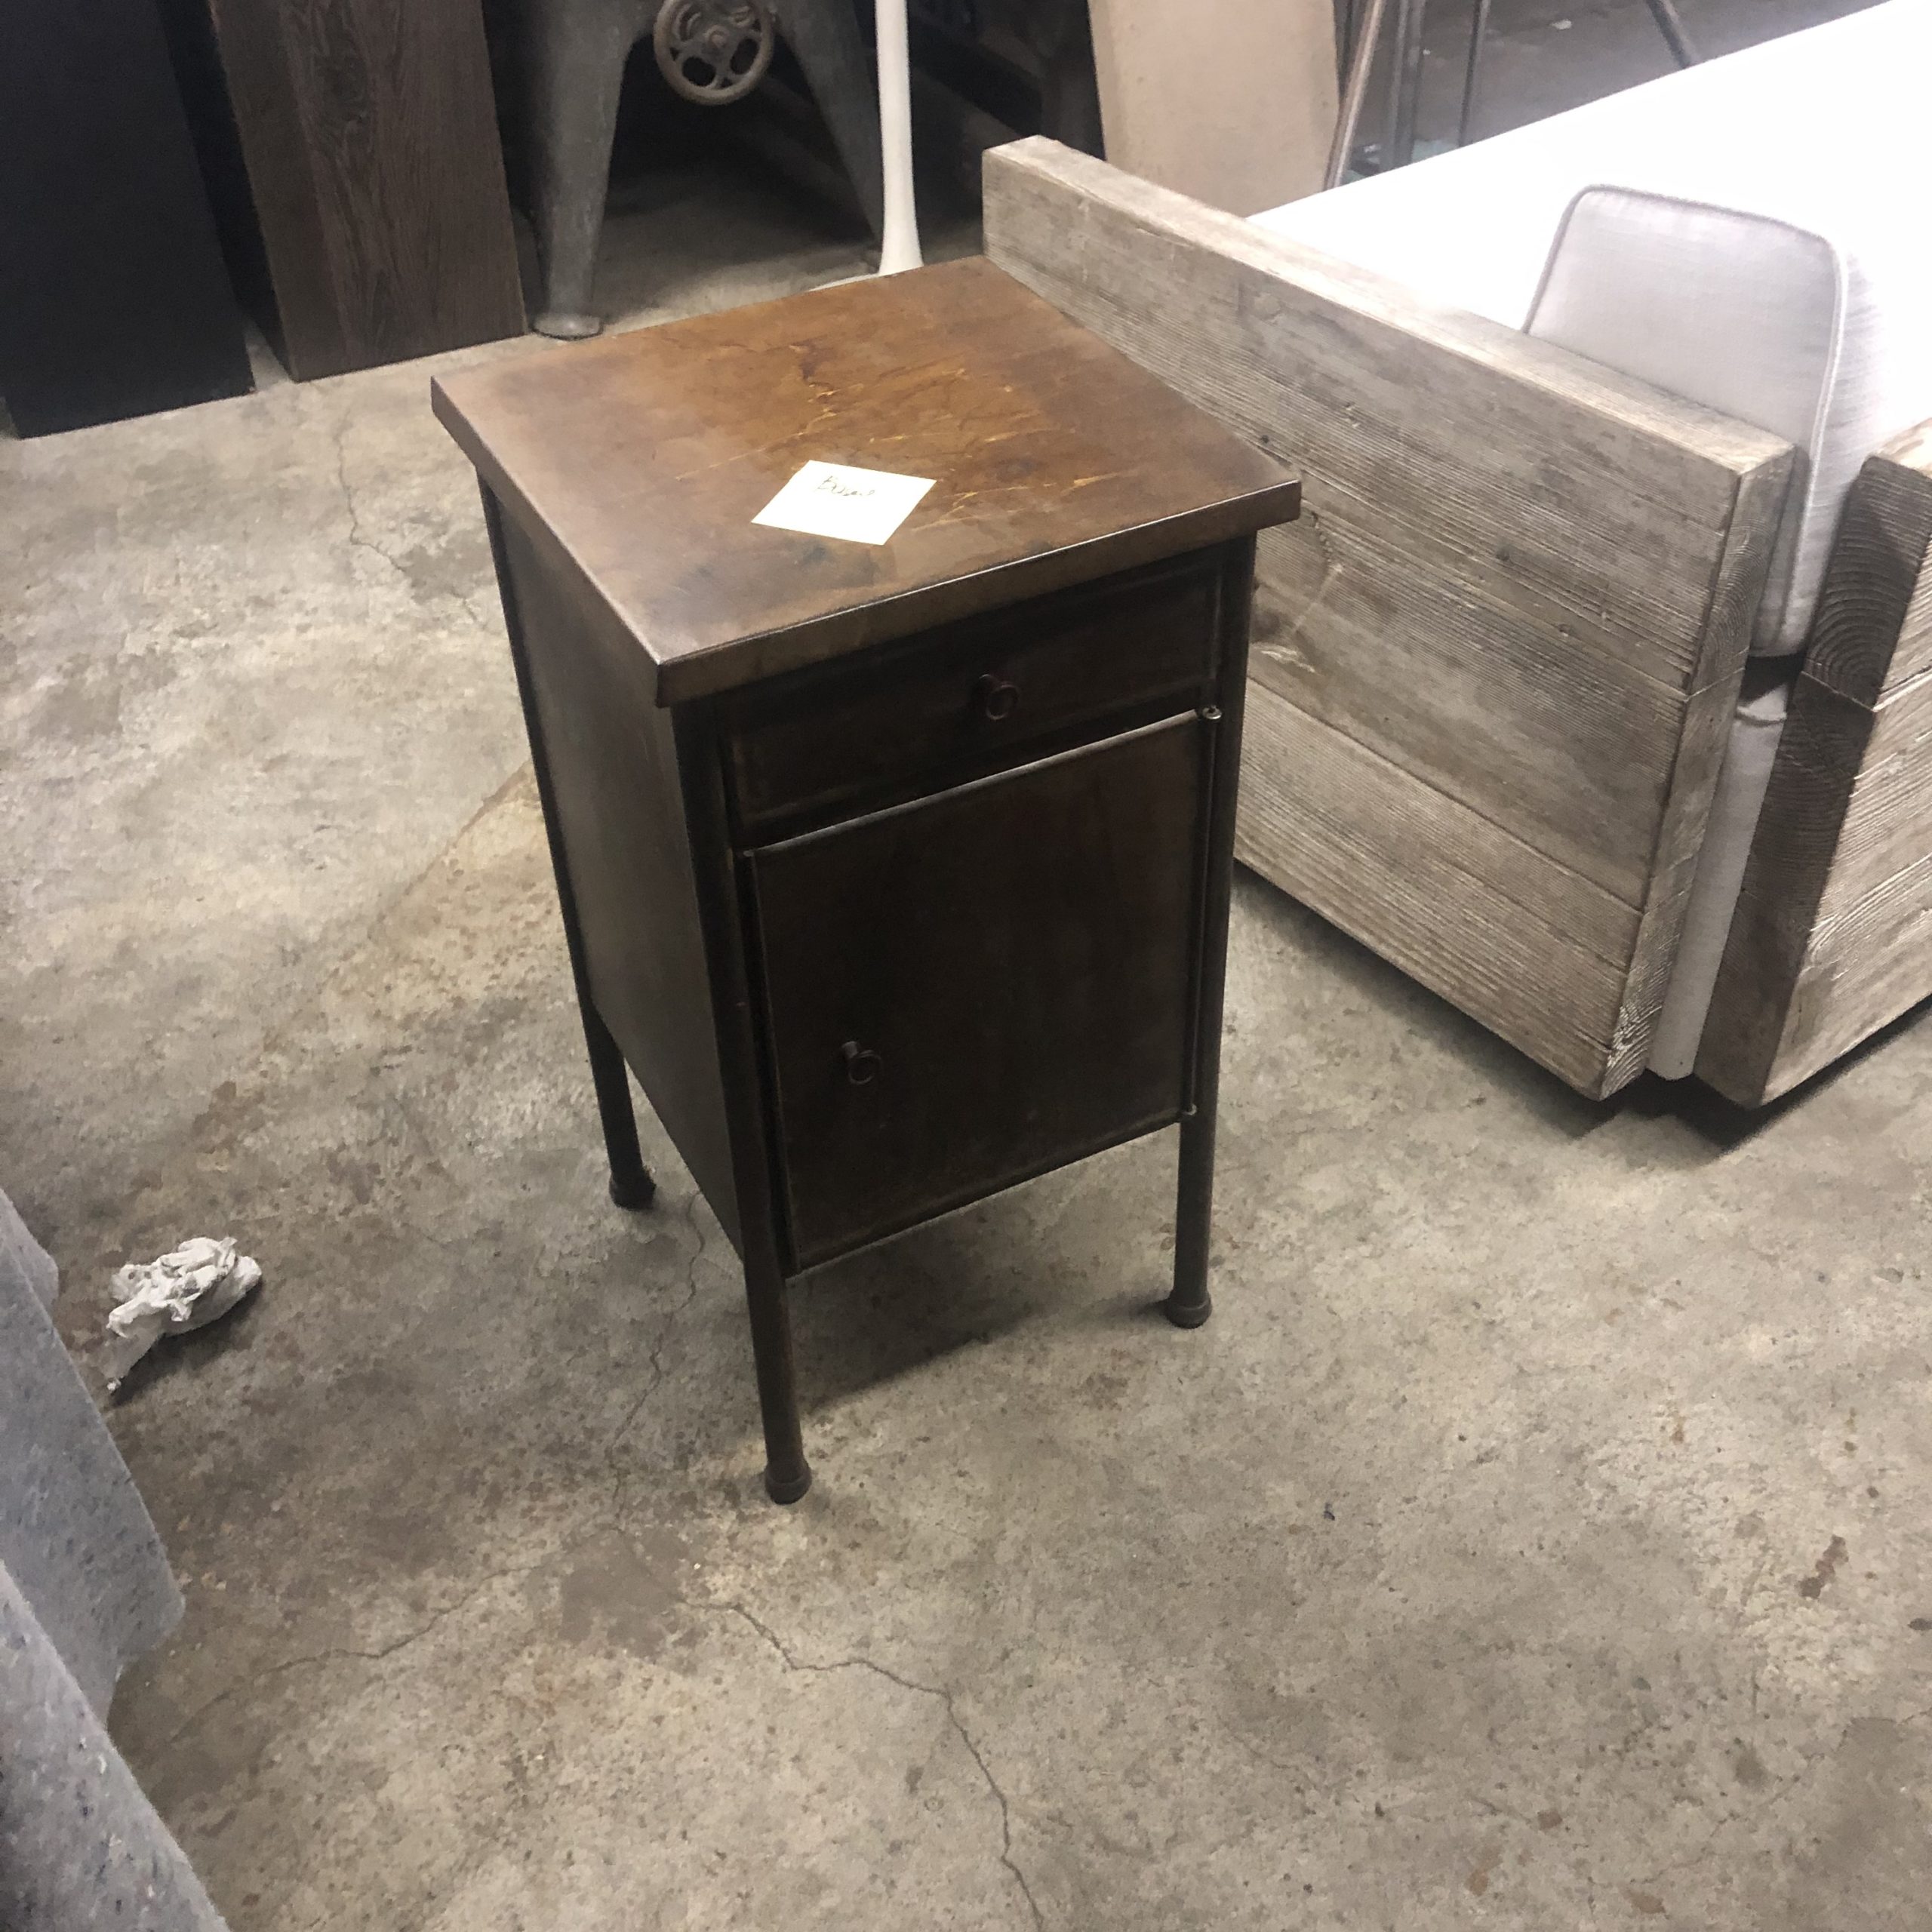 https://willwick.com/wp-content/uploads/2021/03/4.0114_Bronze-Side-TableCabinet-002-scaled.jpg